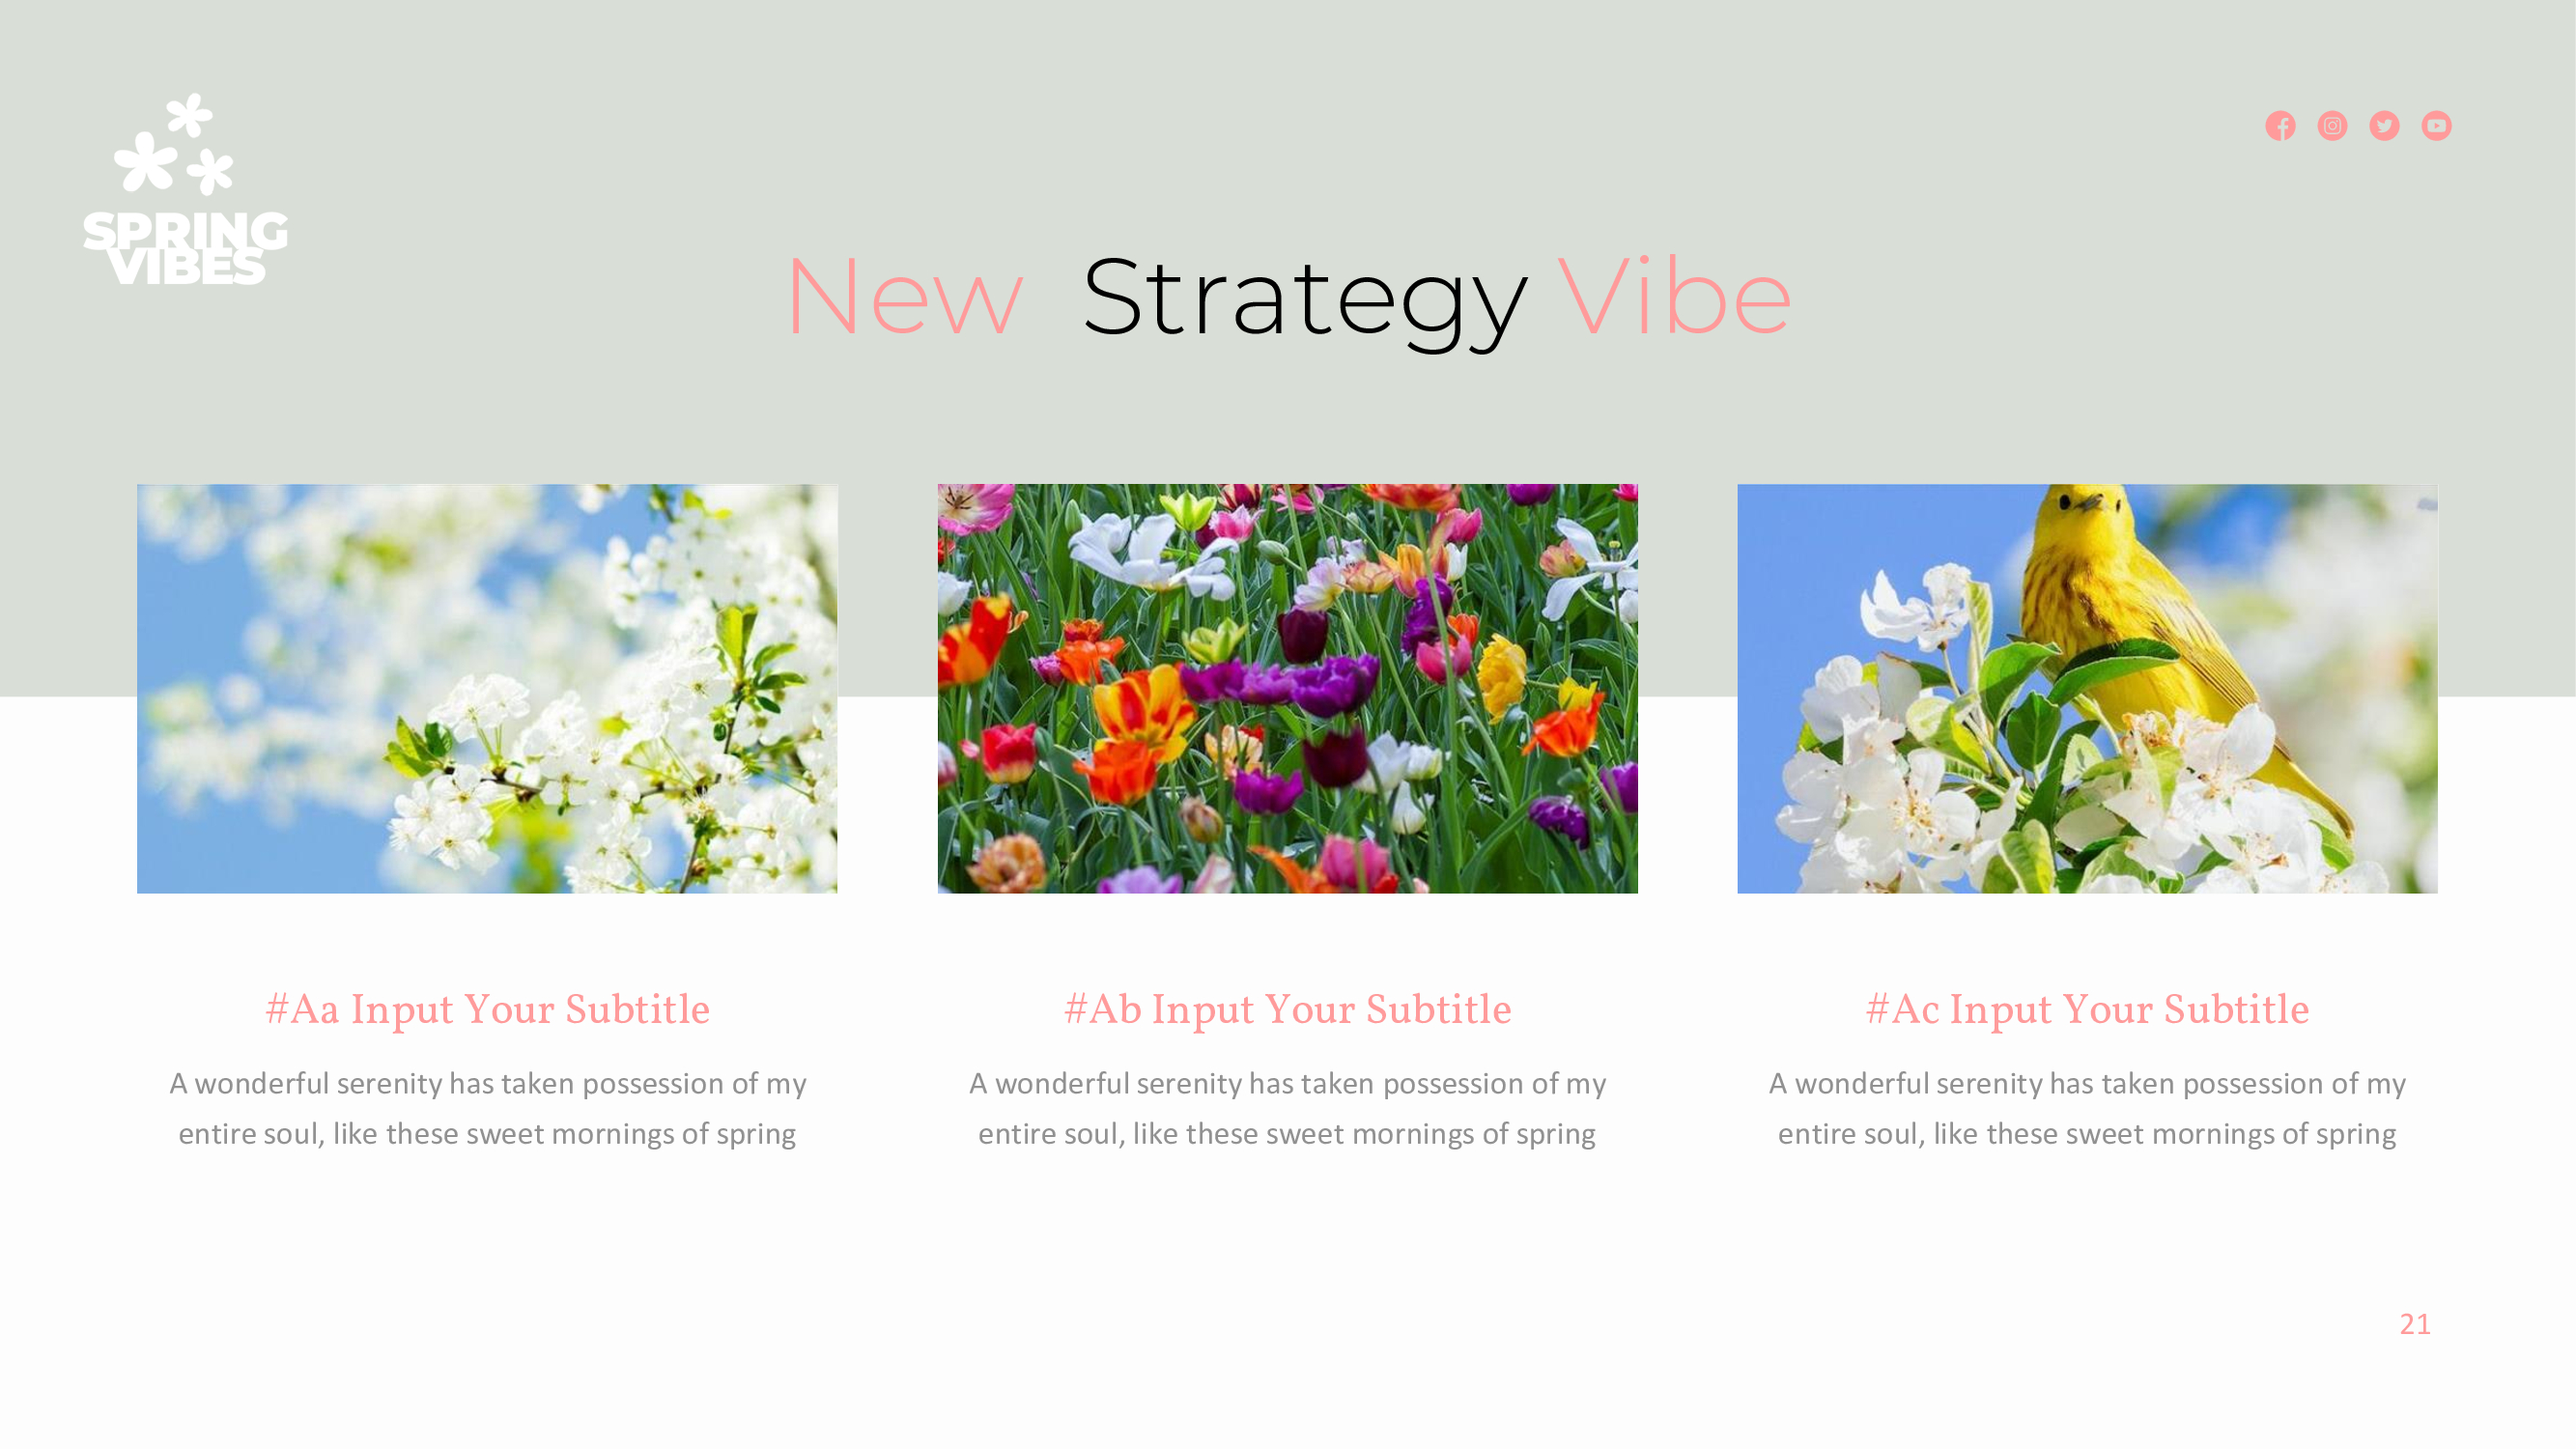 Create your new strategy vibe.